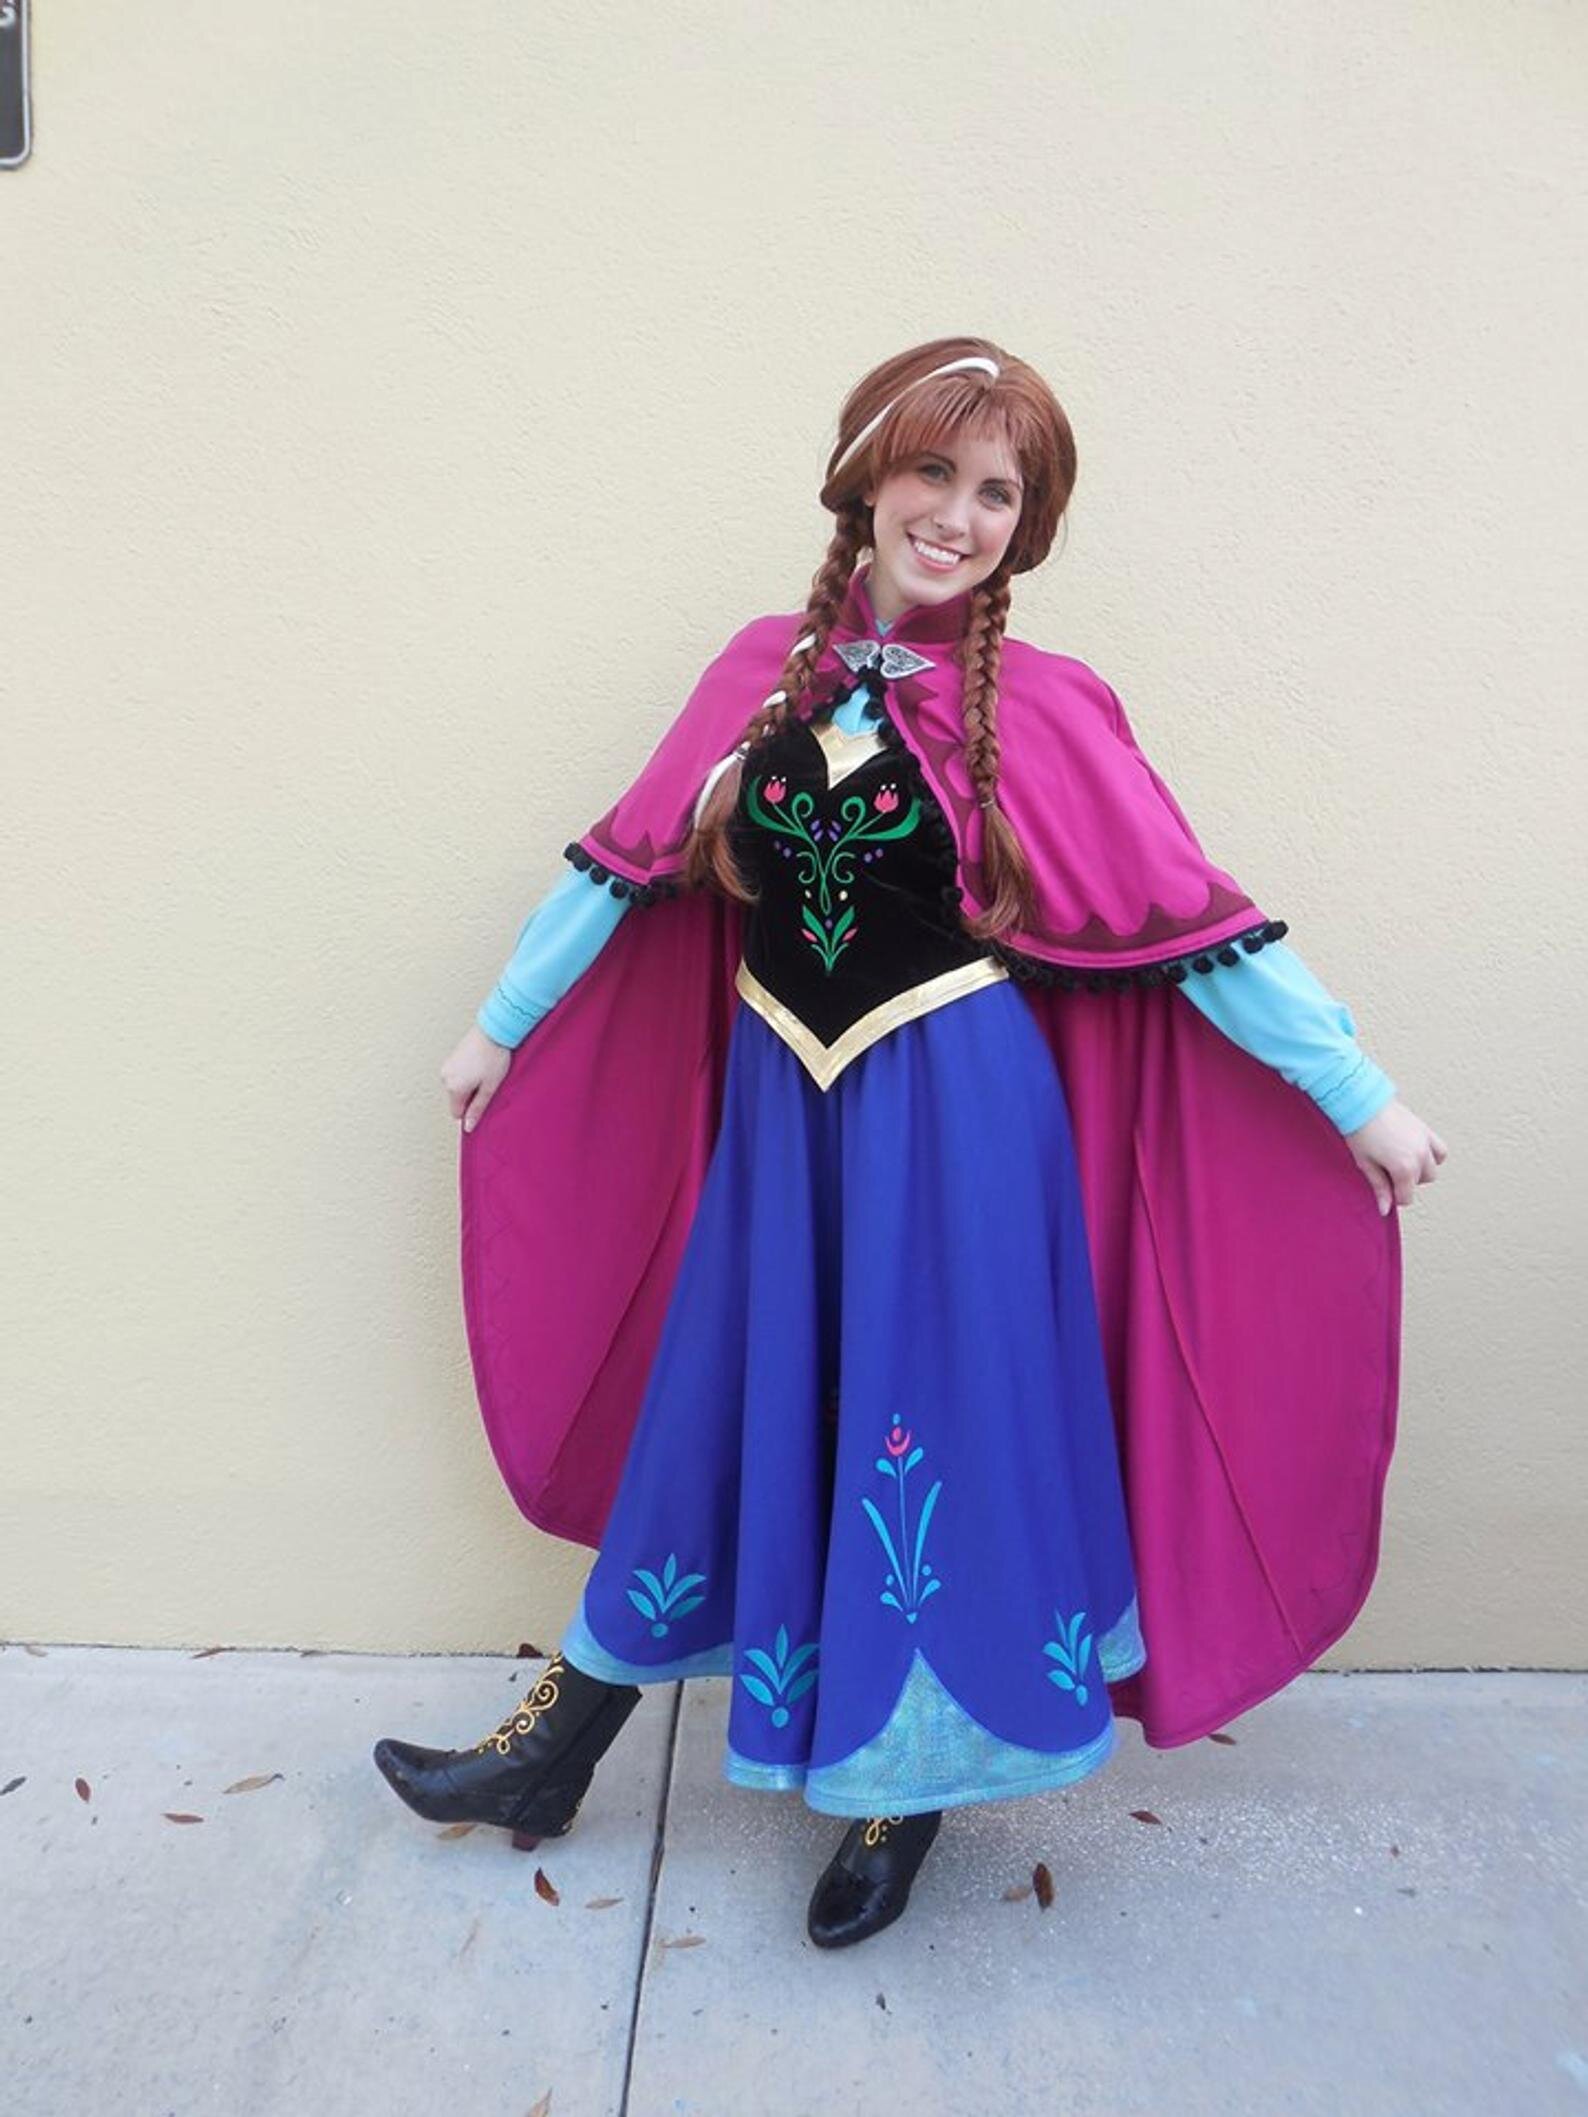 Custom Anna Costume by Etsy seller Prestige Couture